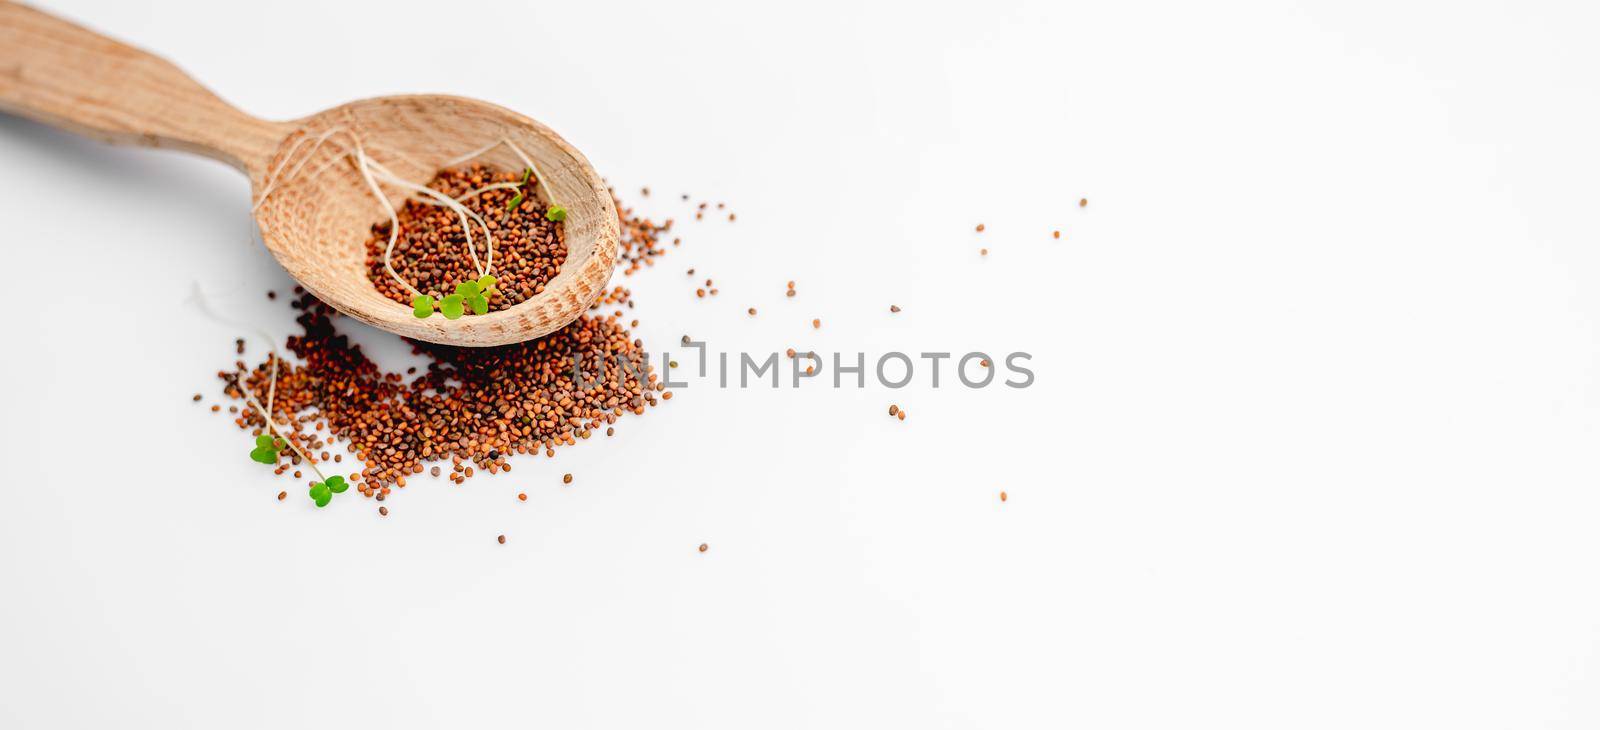 Mustard seed isolated on white background by tan4ikk1